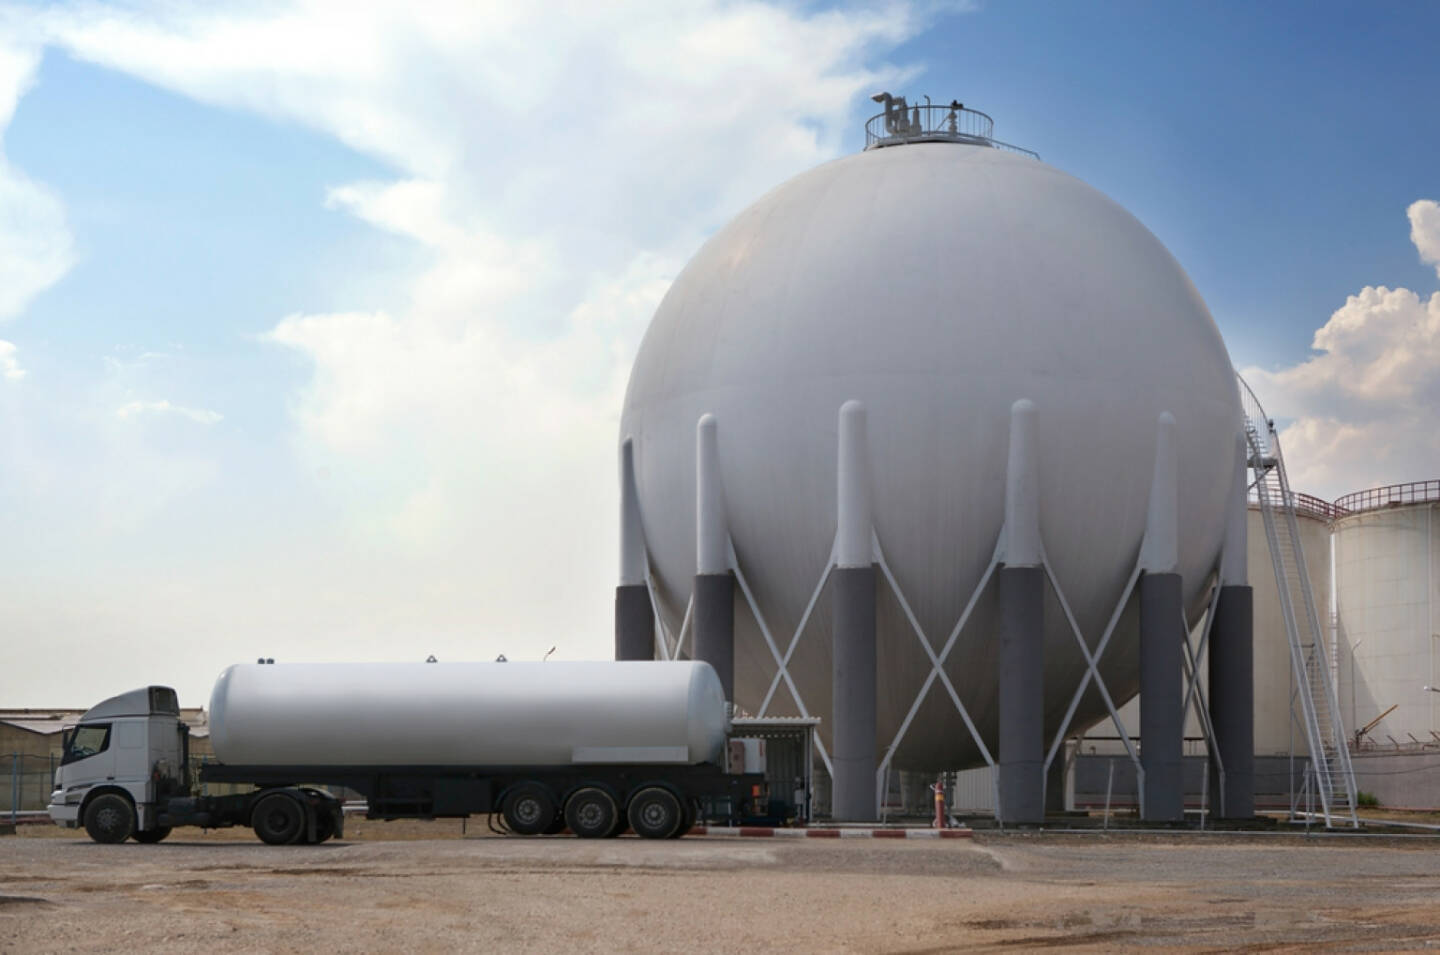 Erdgas, Gastank, http://www.shutterstock.com/de/pic-114637606/stock-photo-natural-gas-tank-and-filling-up-to-truck.html 